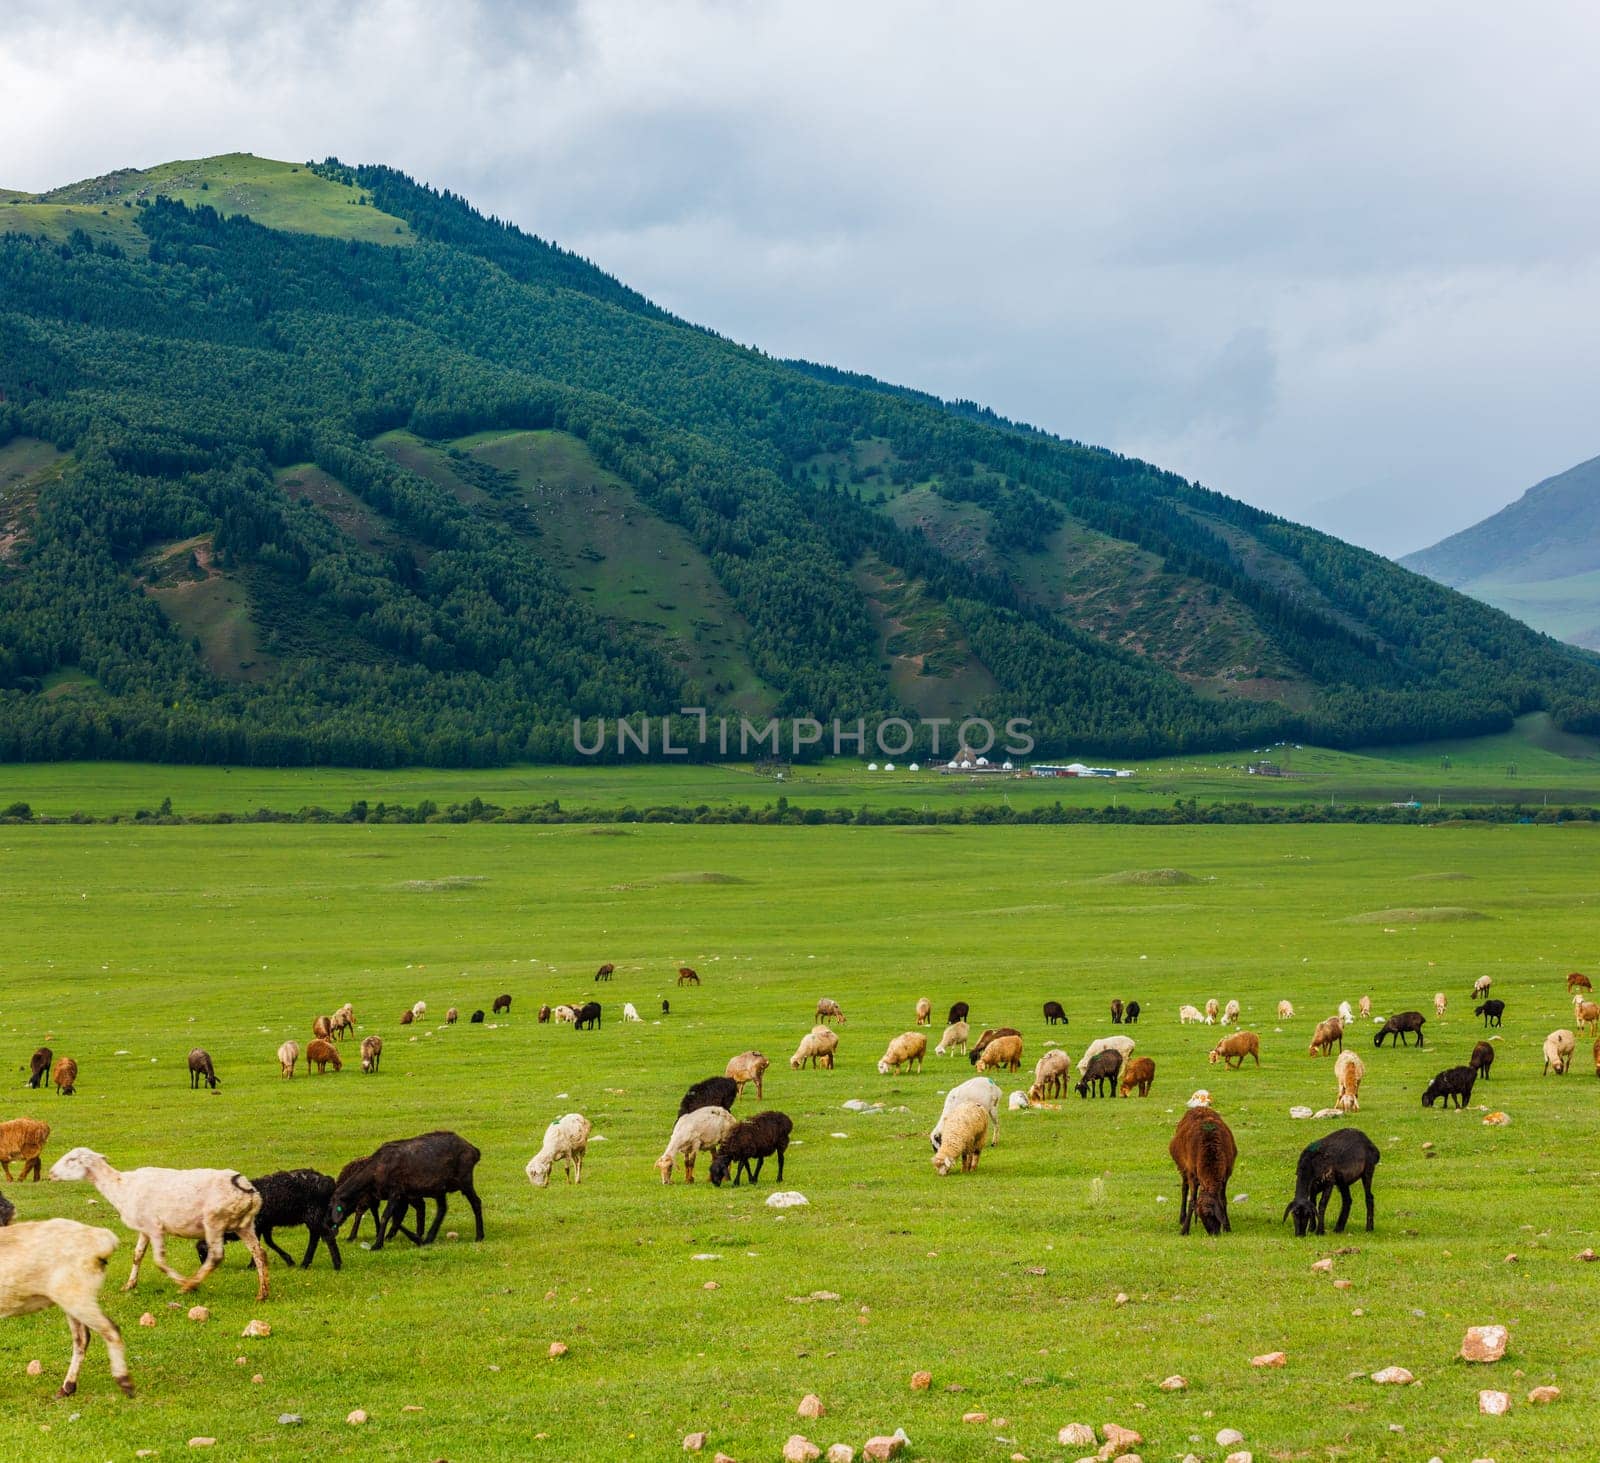 Sheep peacefully graze in a grassy field surrounded by majestic green mountains, creating a picturesque natural landscape. Kyrgyz yurt camp in the background.